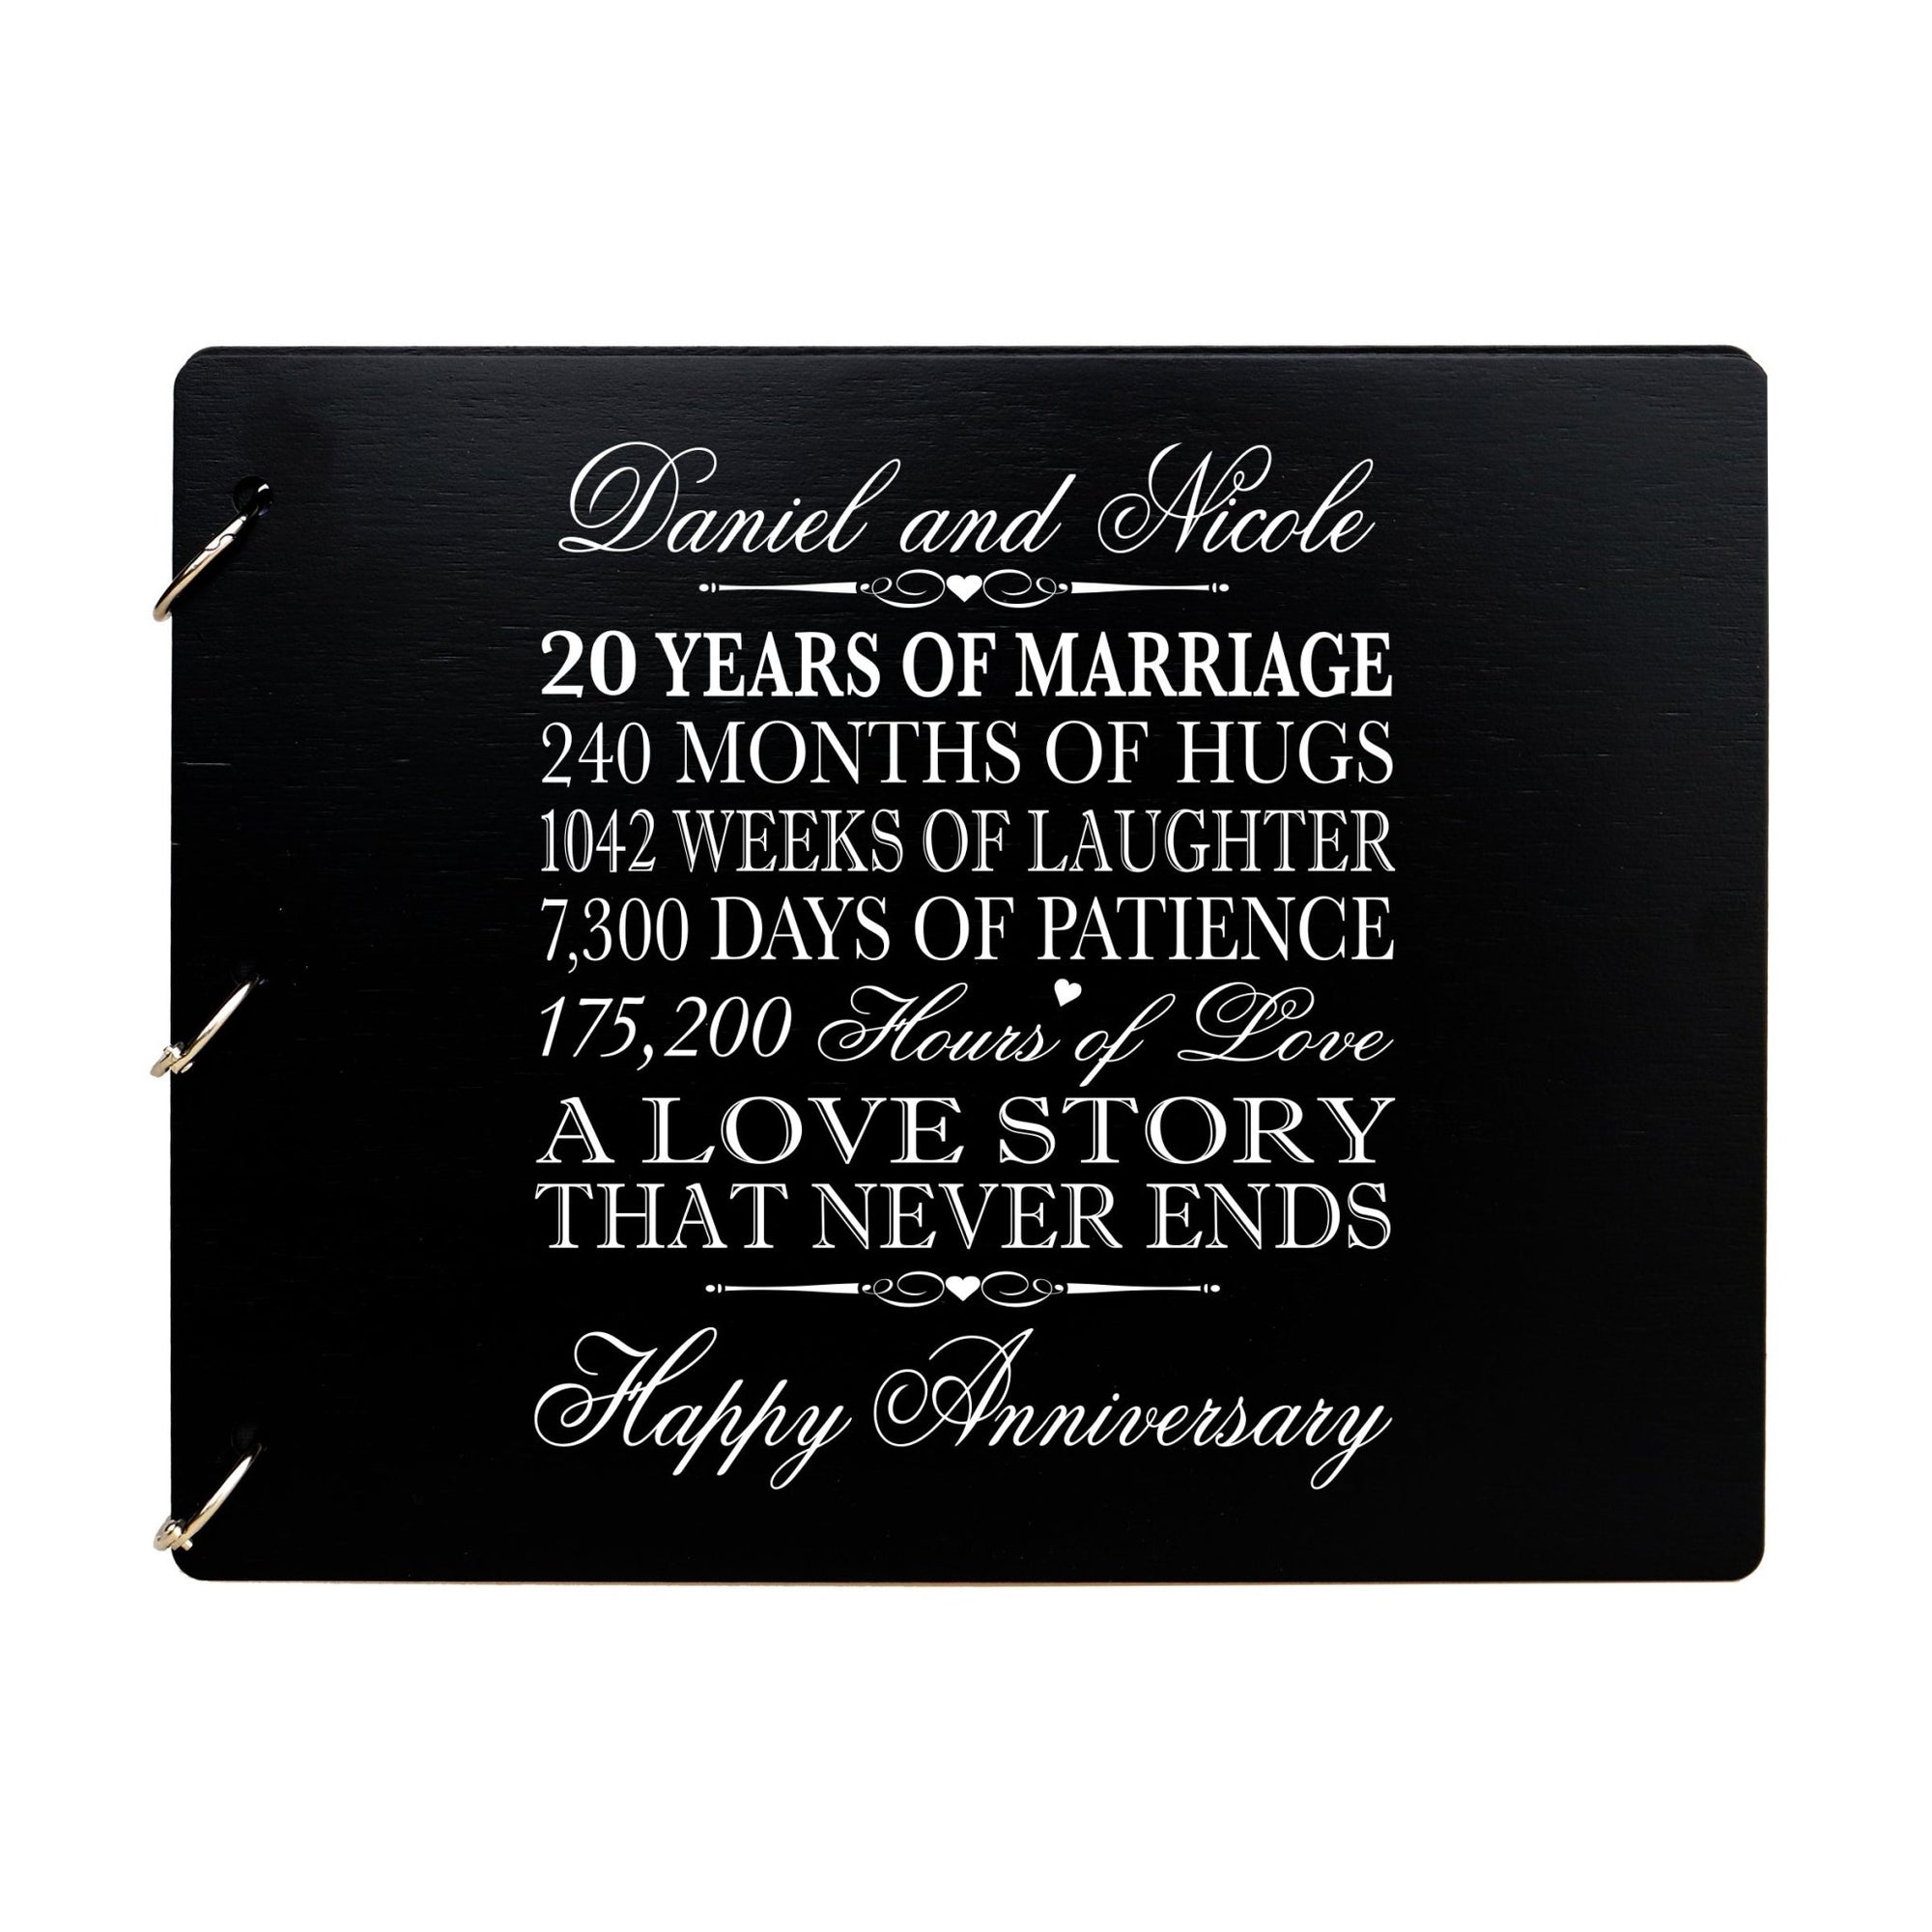 Personalized Guest Book Sign for 20th Wedding Anniversary - A Love Story - LifeSong Milestones